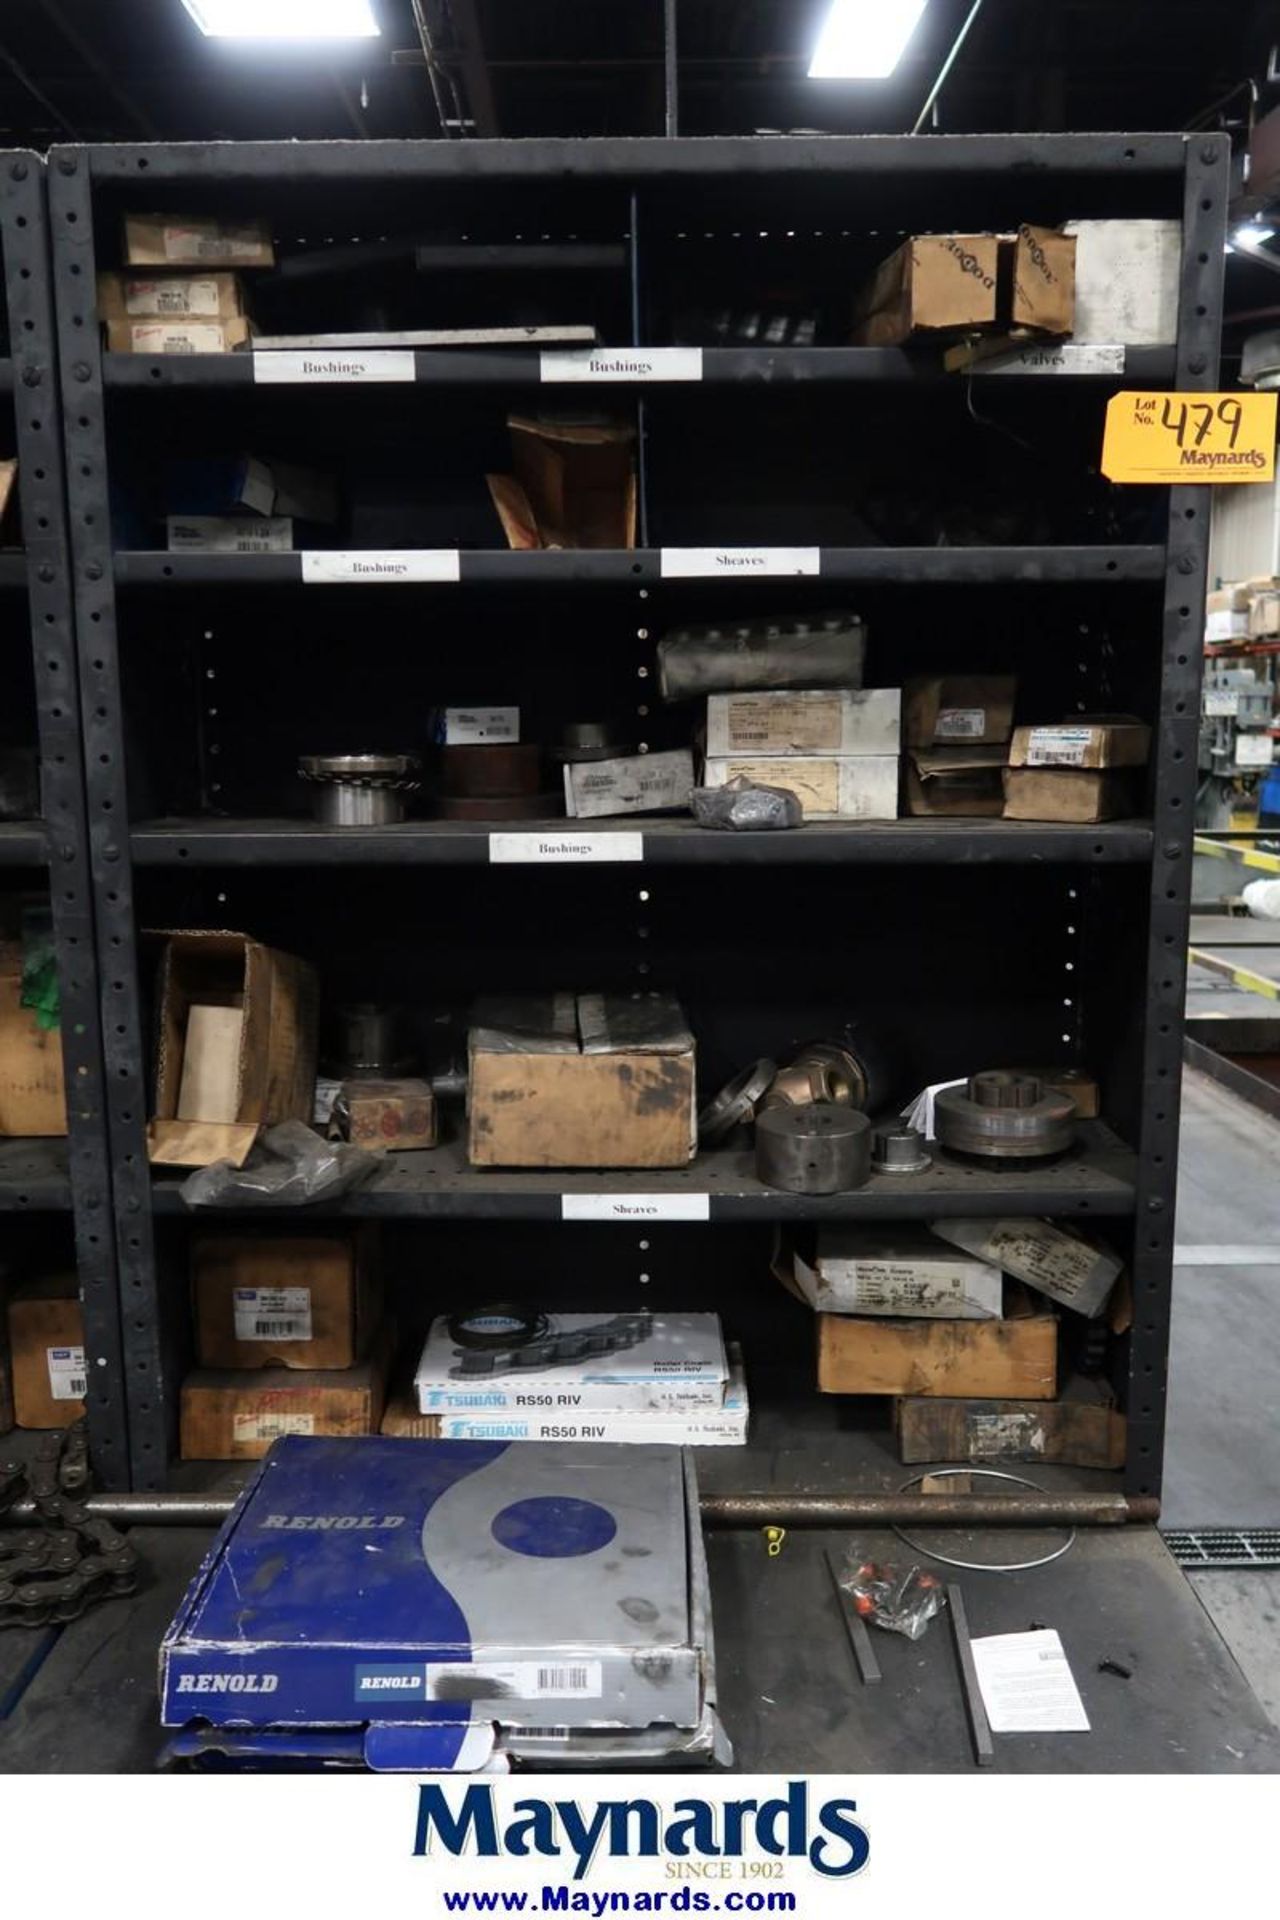 Adjustable Steel Shelving Units with Contents of Heat Treat Spare Parts - Image 15 of 16